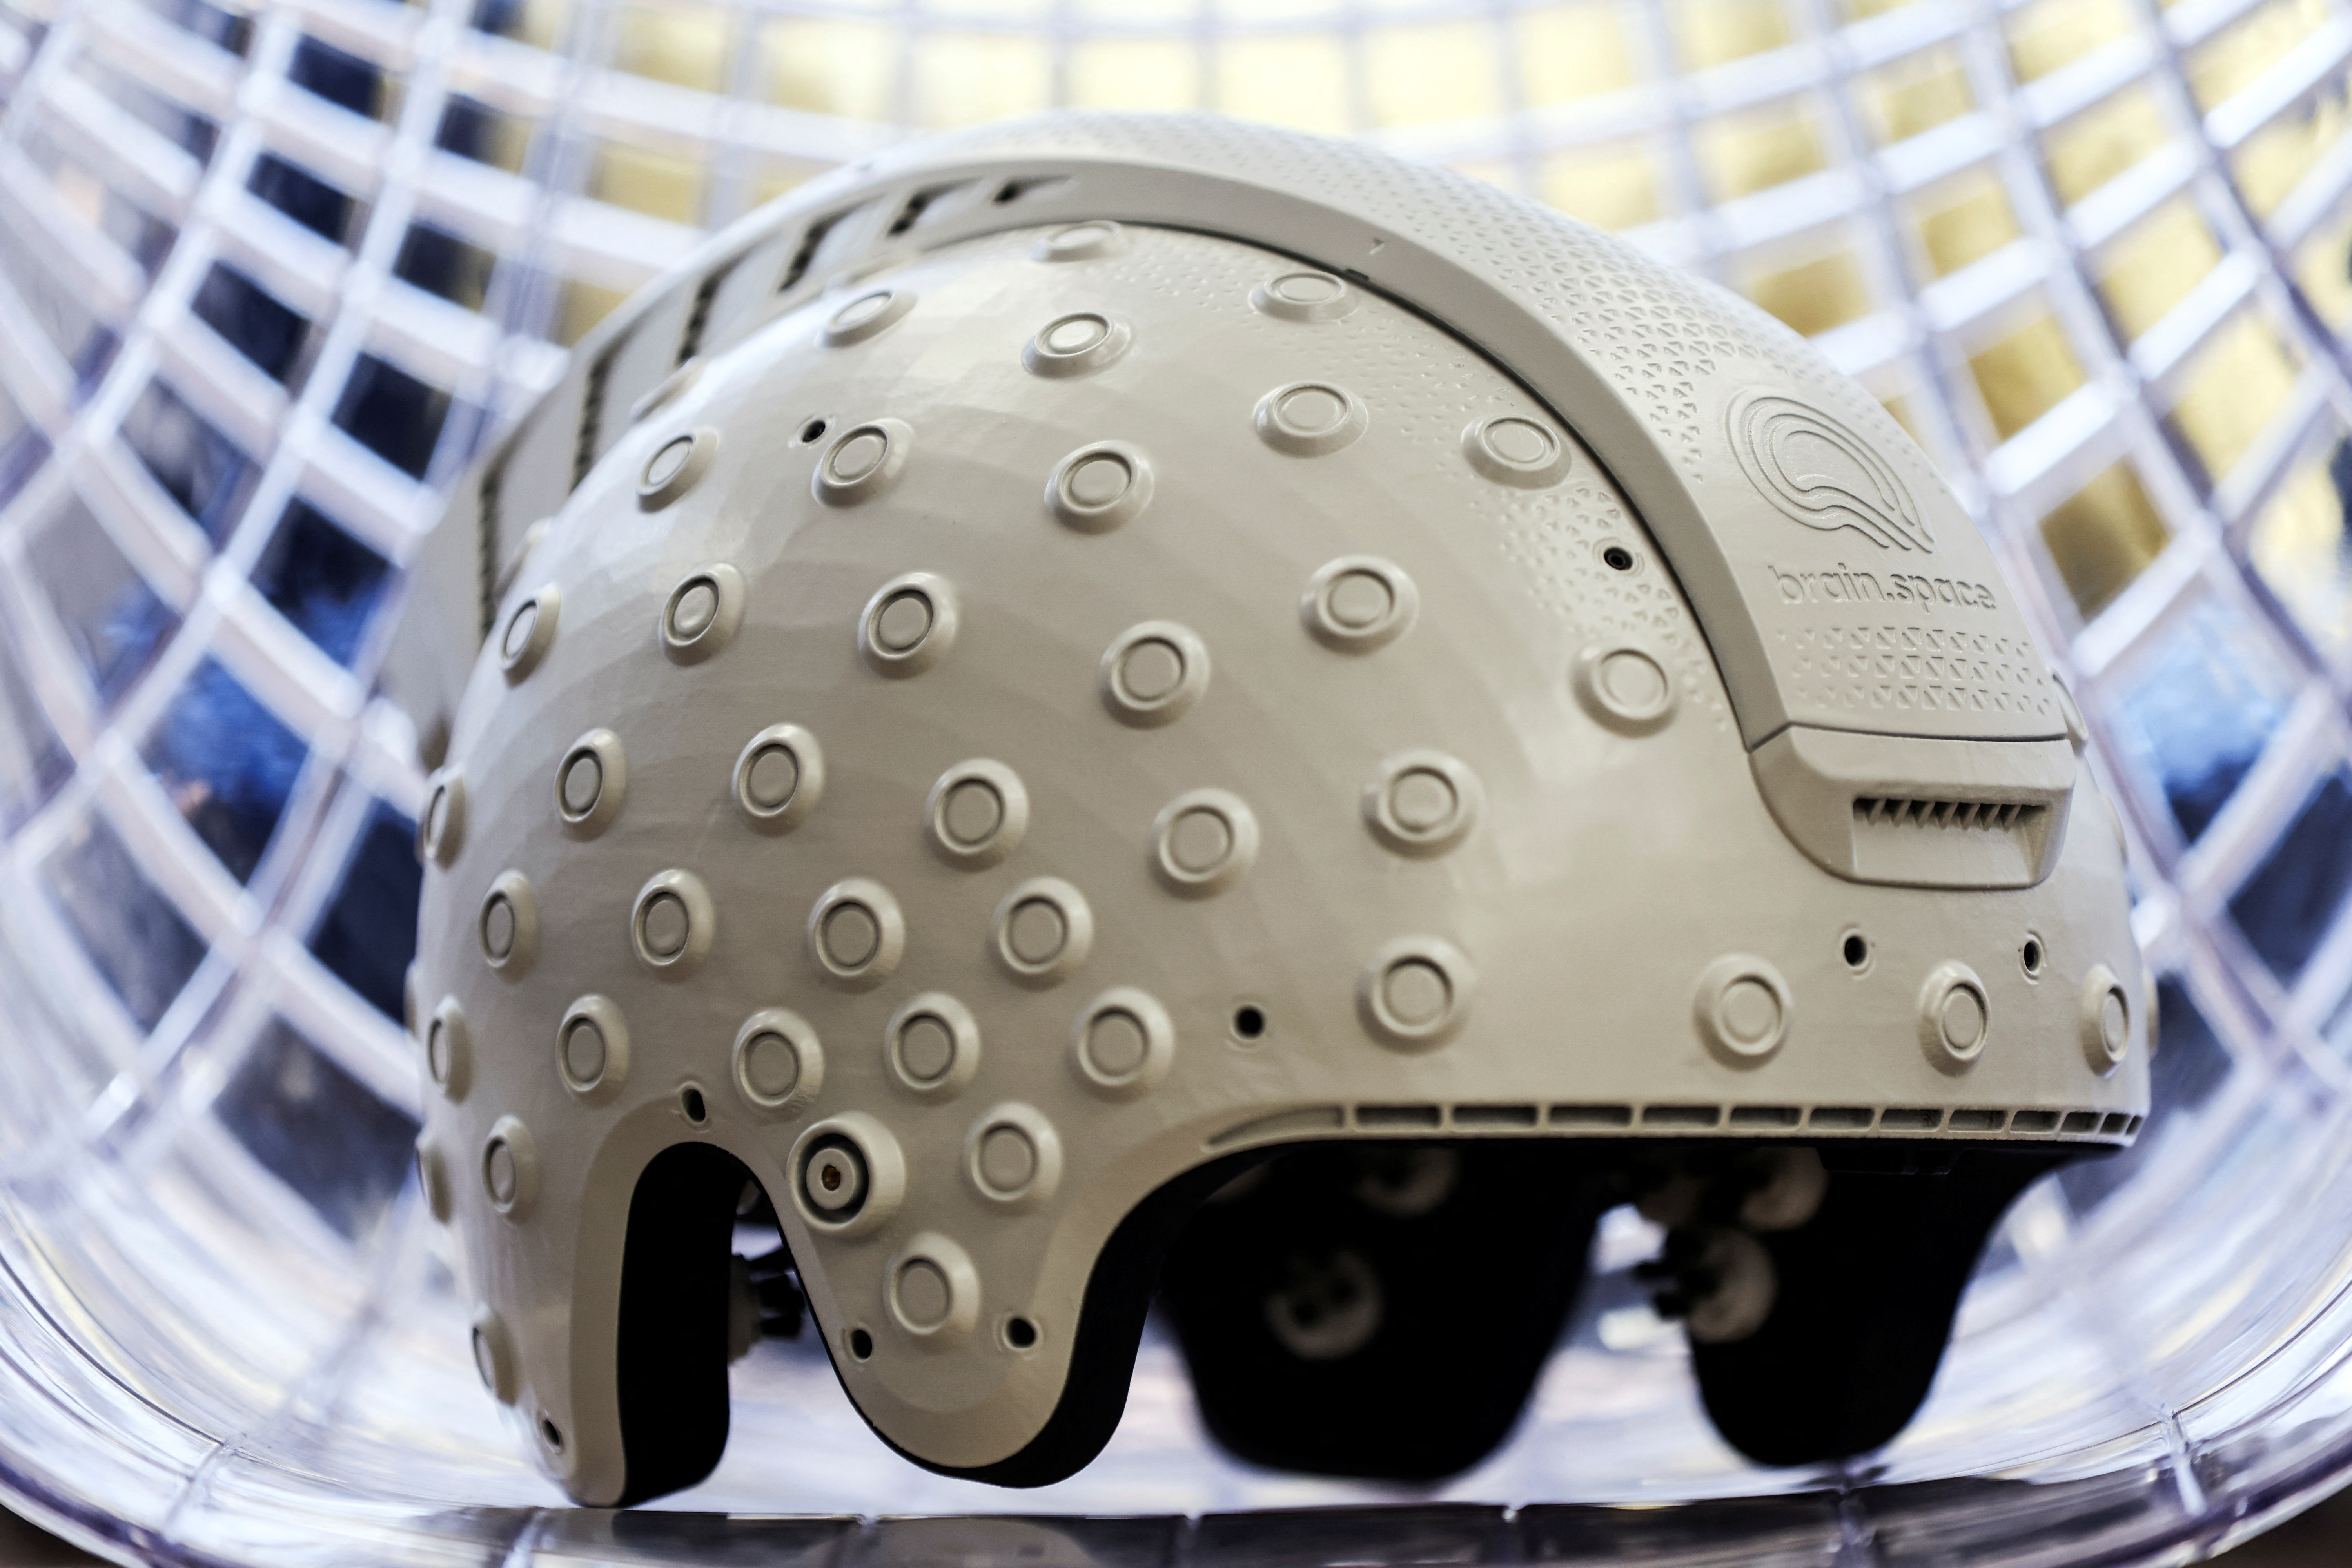 An EEG enabled helmet, due to be used in an experiment on the impact of a microgravity environment on brain activity is displayed at Israeli startup Brain.Space in Tel Aviv